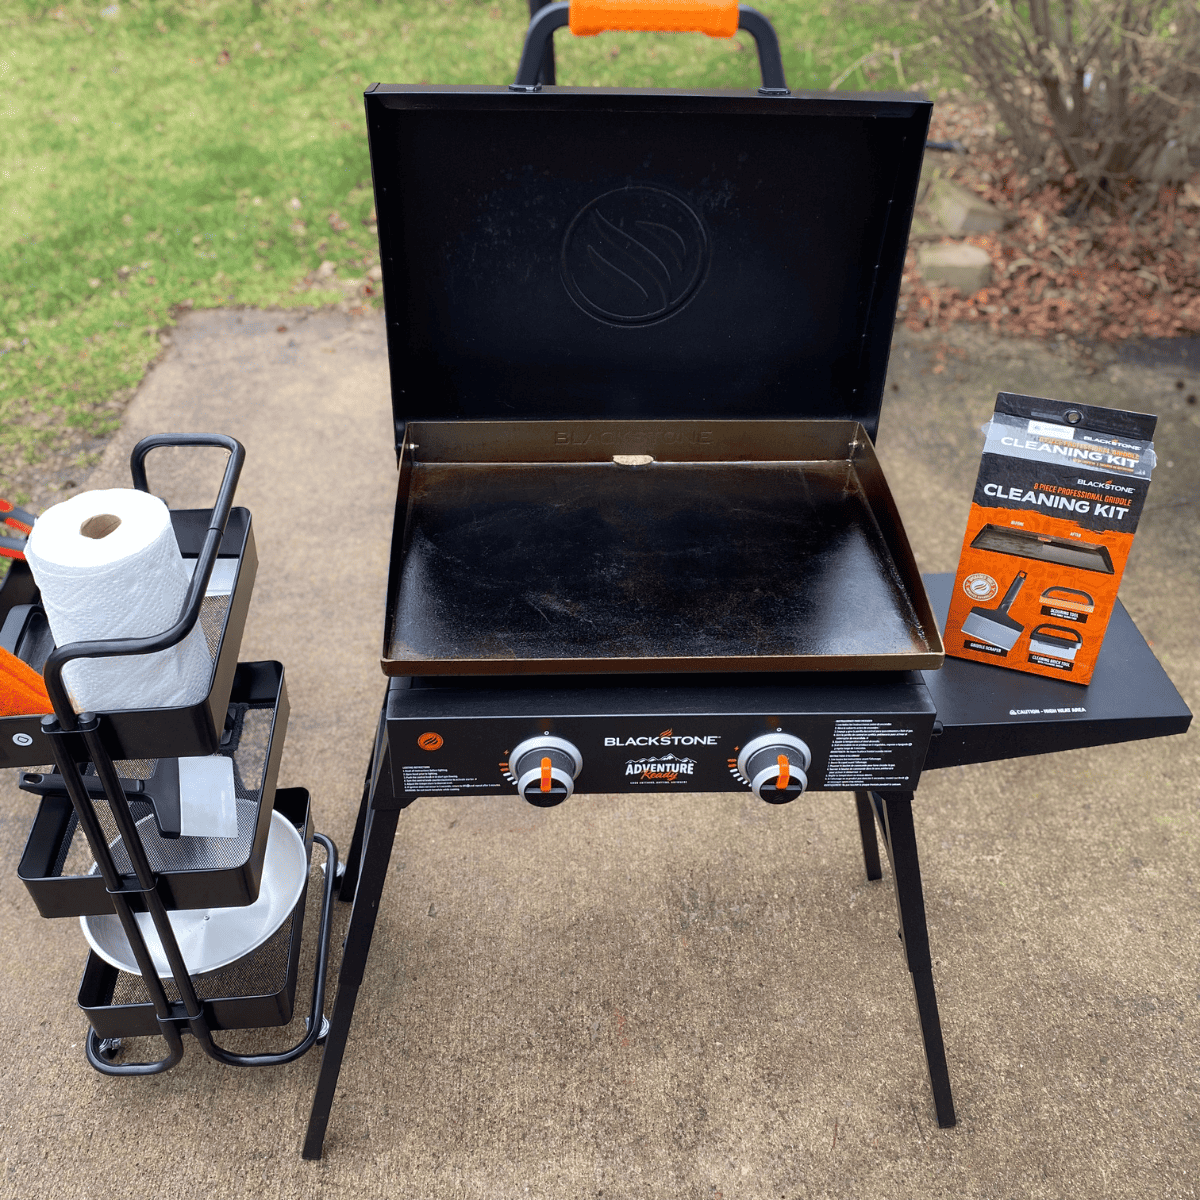 Blackstone griddle on patio with lid open. Cleaning kit sits on the side table while an accessory cart is to the right of the griddle